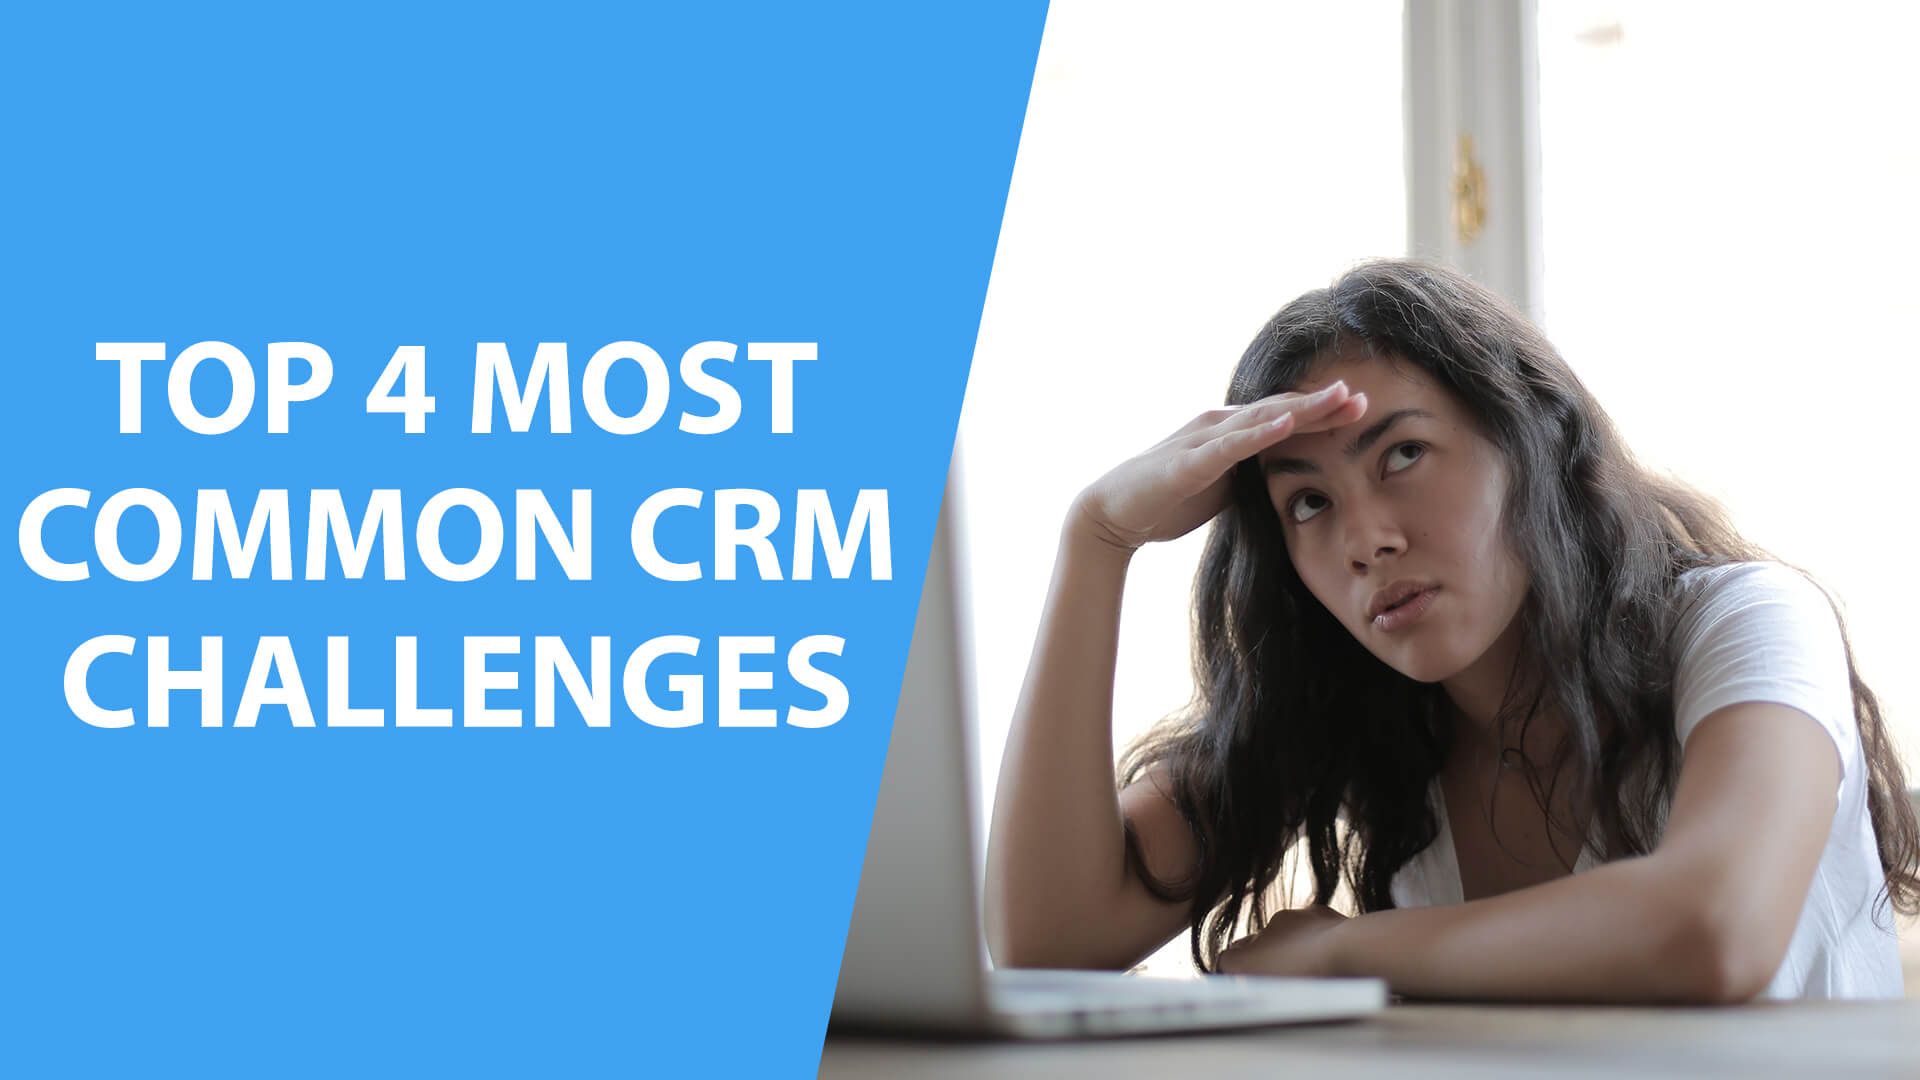 Top 4 Most Common CRM Challenges